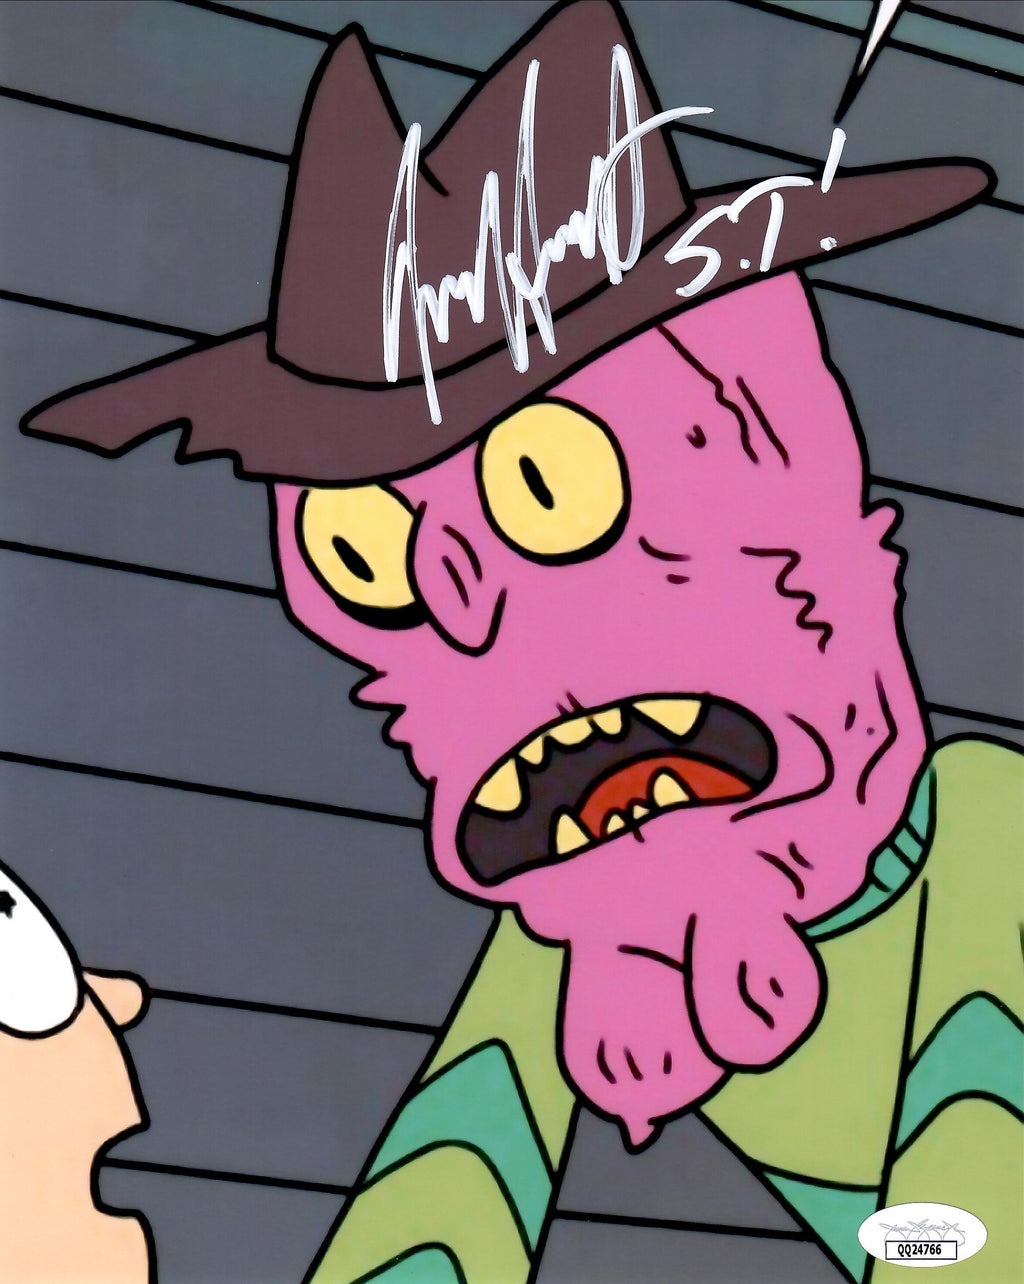 Jess Harnell Scary Terry auto signed inscribed 8x10 photo JSA COA Rick and Morty